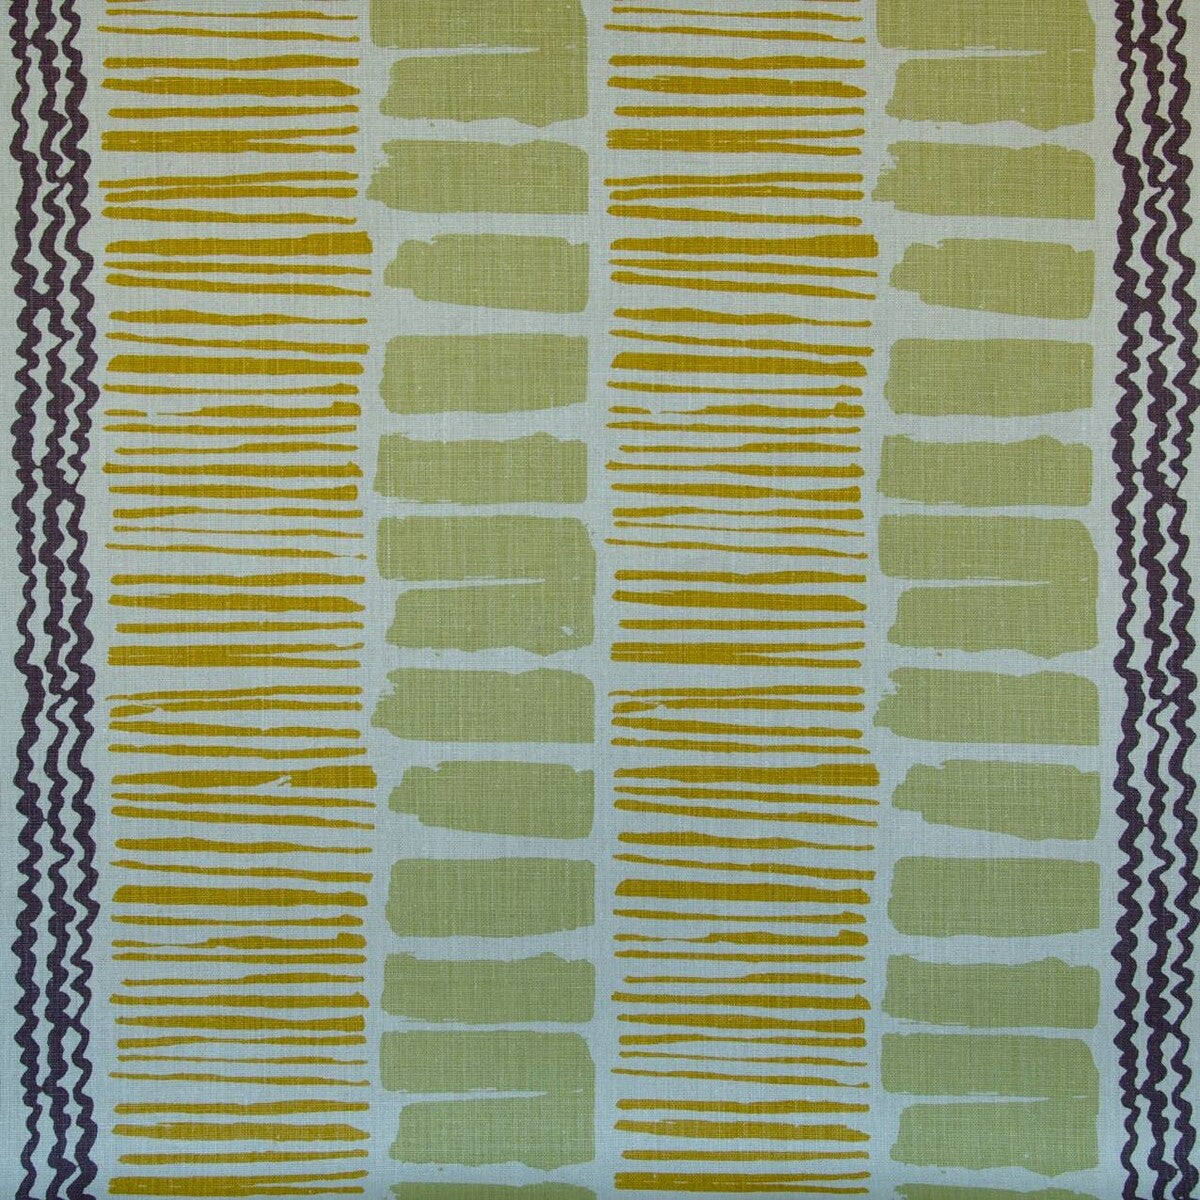 Saltaire fabric in lime/gold/plum color - pattern BFC-3624.34.0 - by Lee Jofa in the Blithfield collection